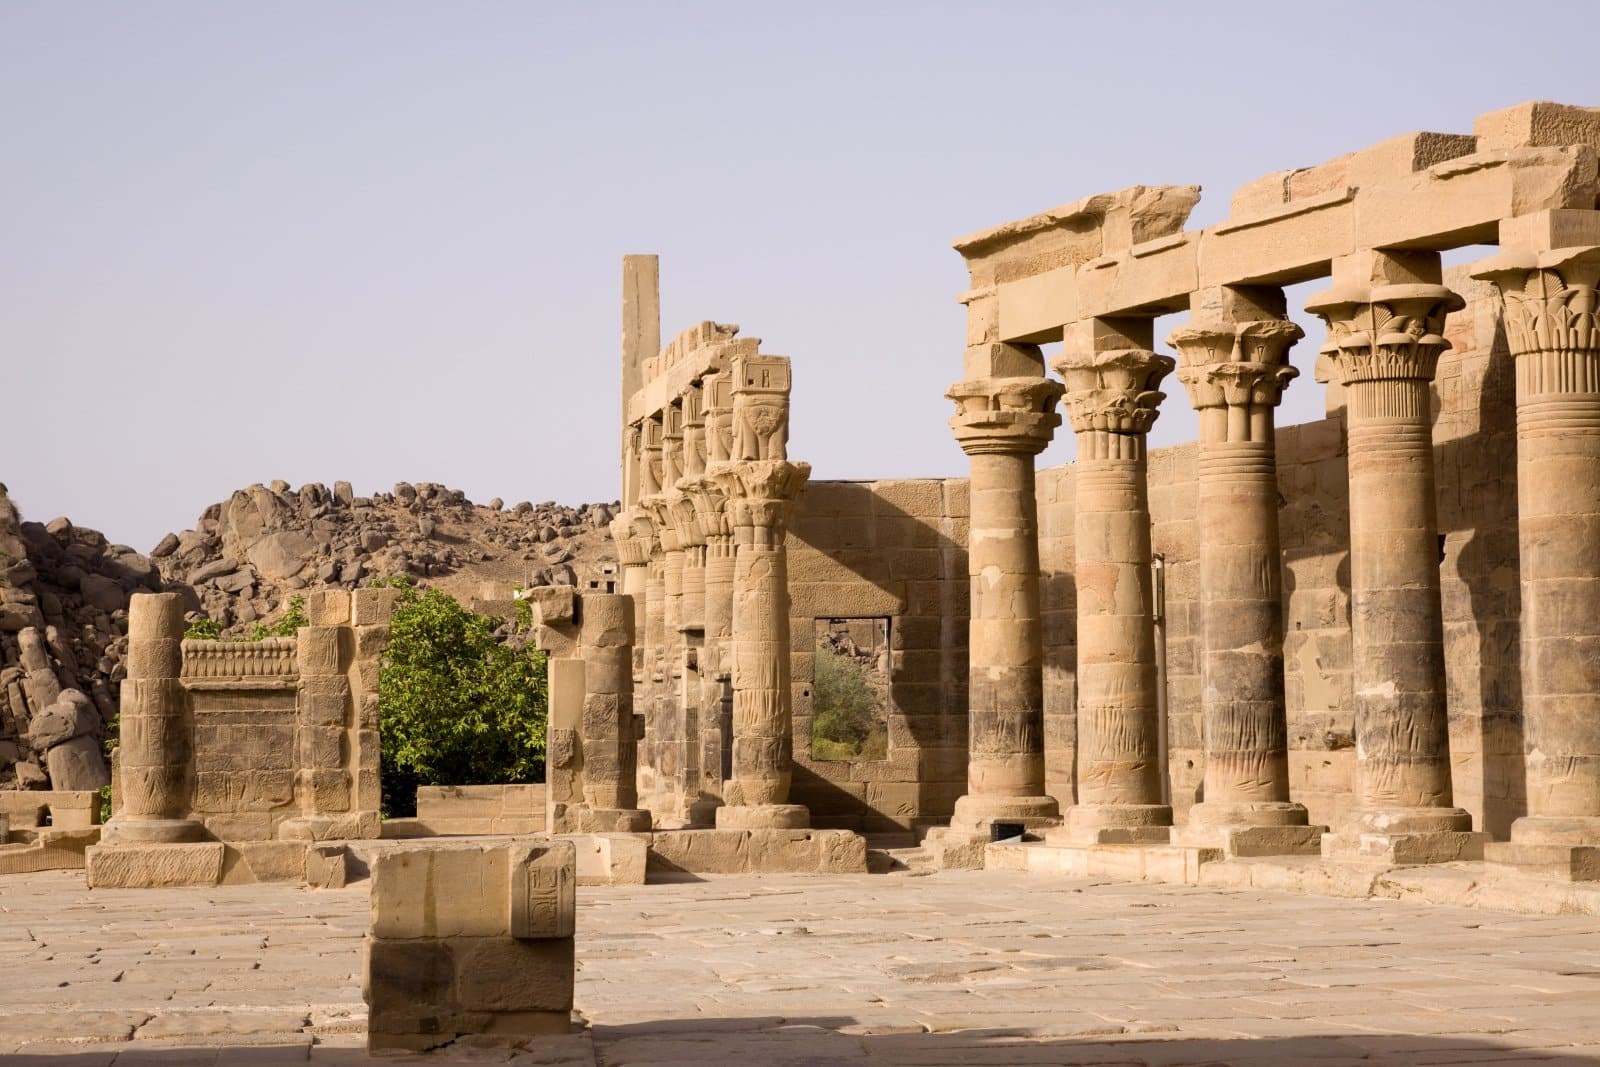 <p class="wp-caption-text">Image Credit: Shutterstock / franco lucato</p>  <p><span>Aswan, Egypt’s southernmost city, offers a more tranquil experience along the Nile. The Philae Temple, dedicated to the goddess Isis, sits on an island. It showcases ancient worship and modern engineering efforts that relocated the temple to save it from flooding.</span></p>